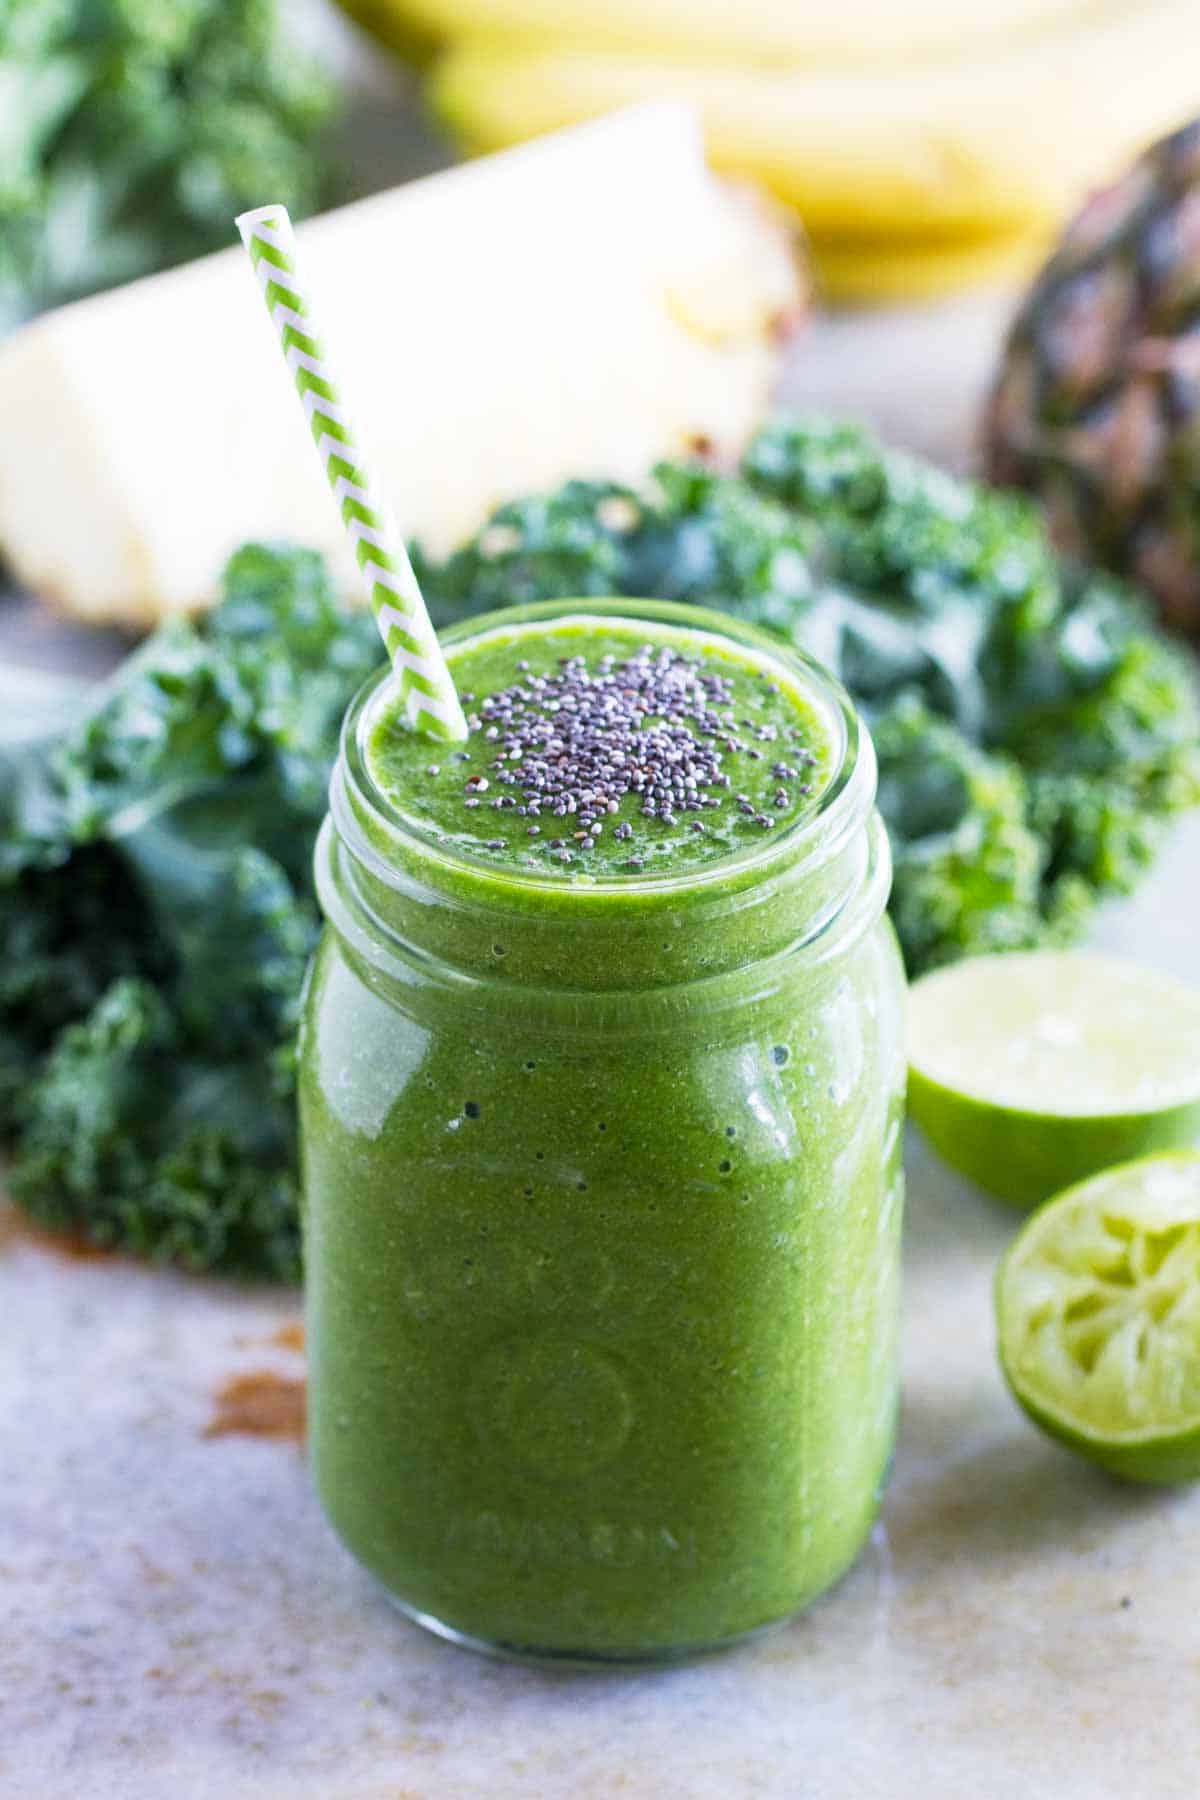 kale smoothie - green smoothie - with a straw and chia seeds in a jar